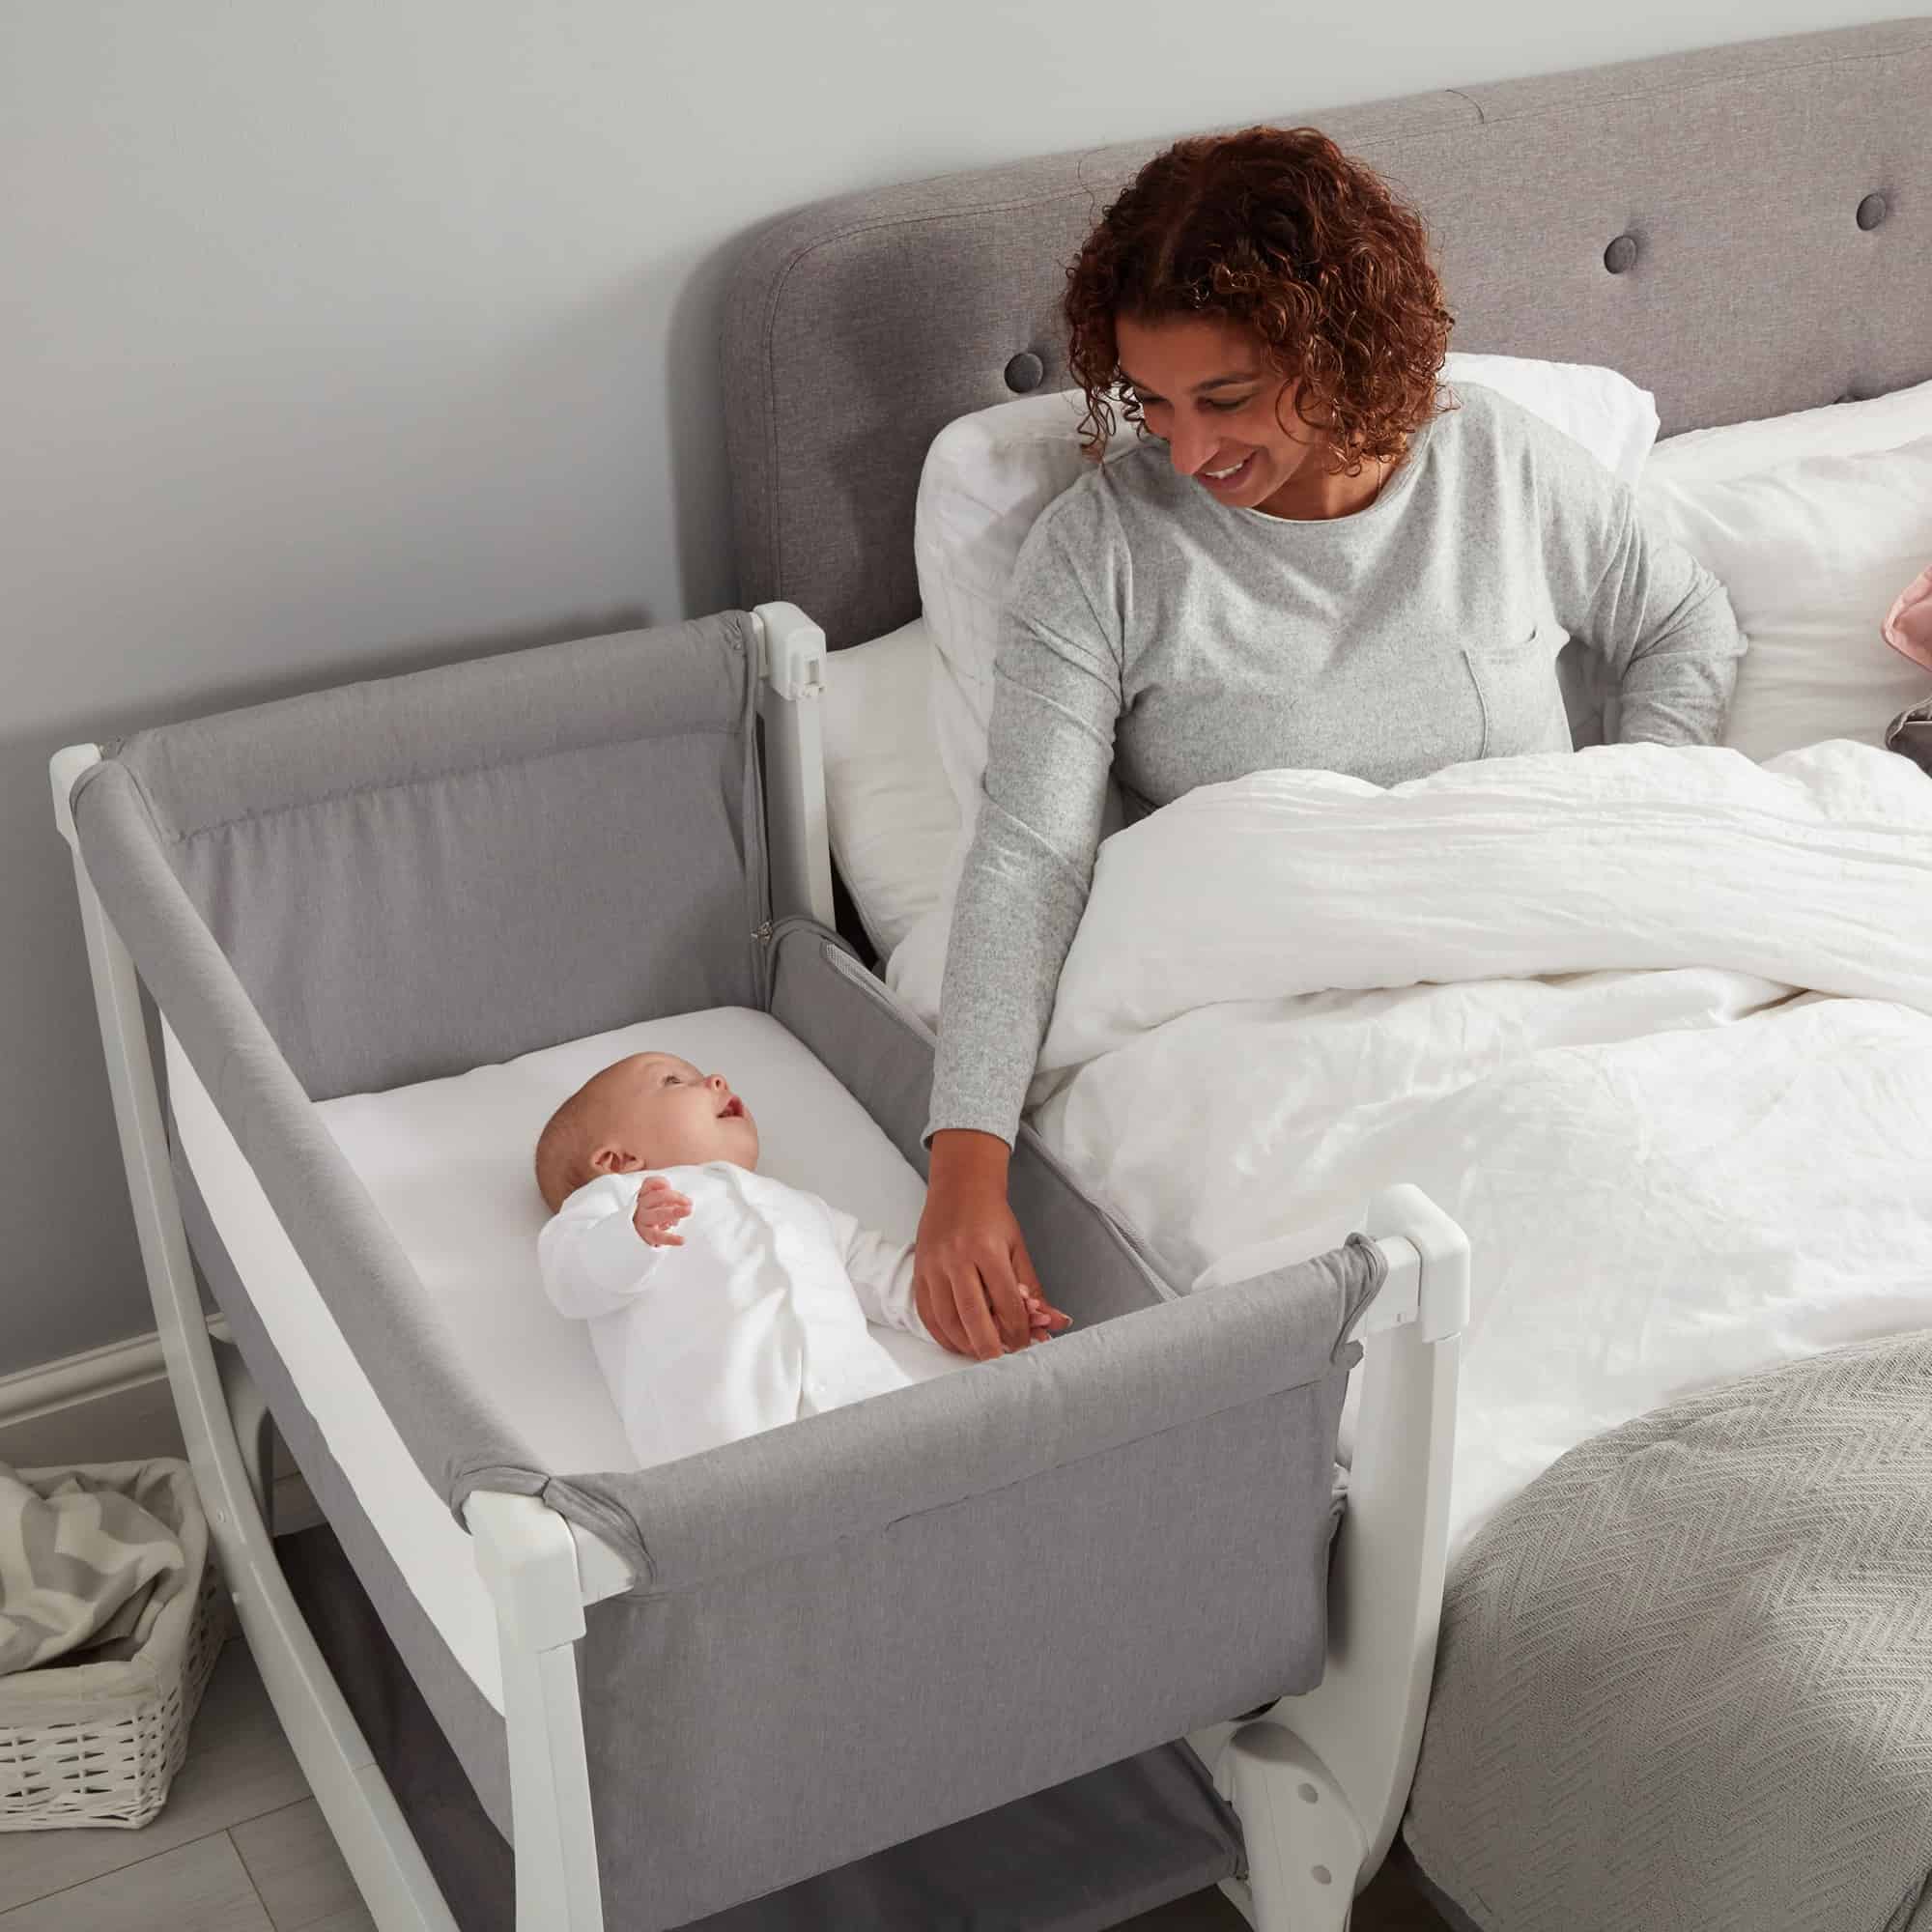 mom holding baby's hand in bedside bassinet